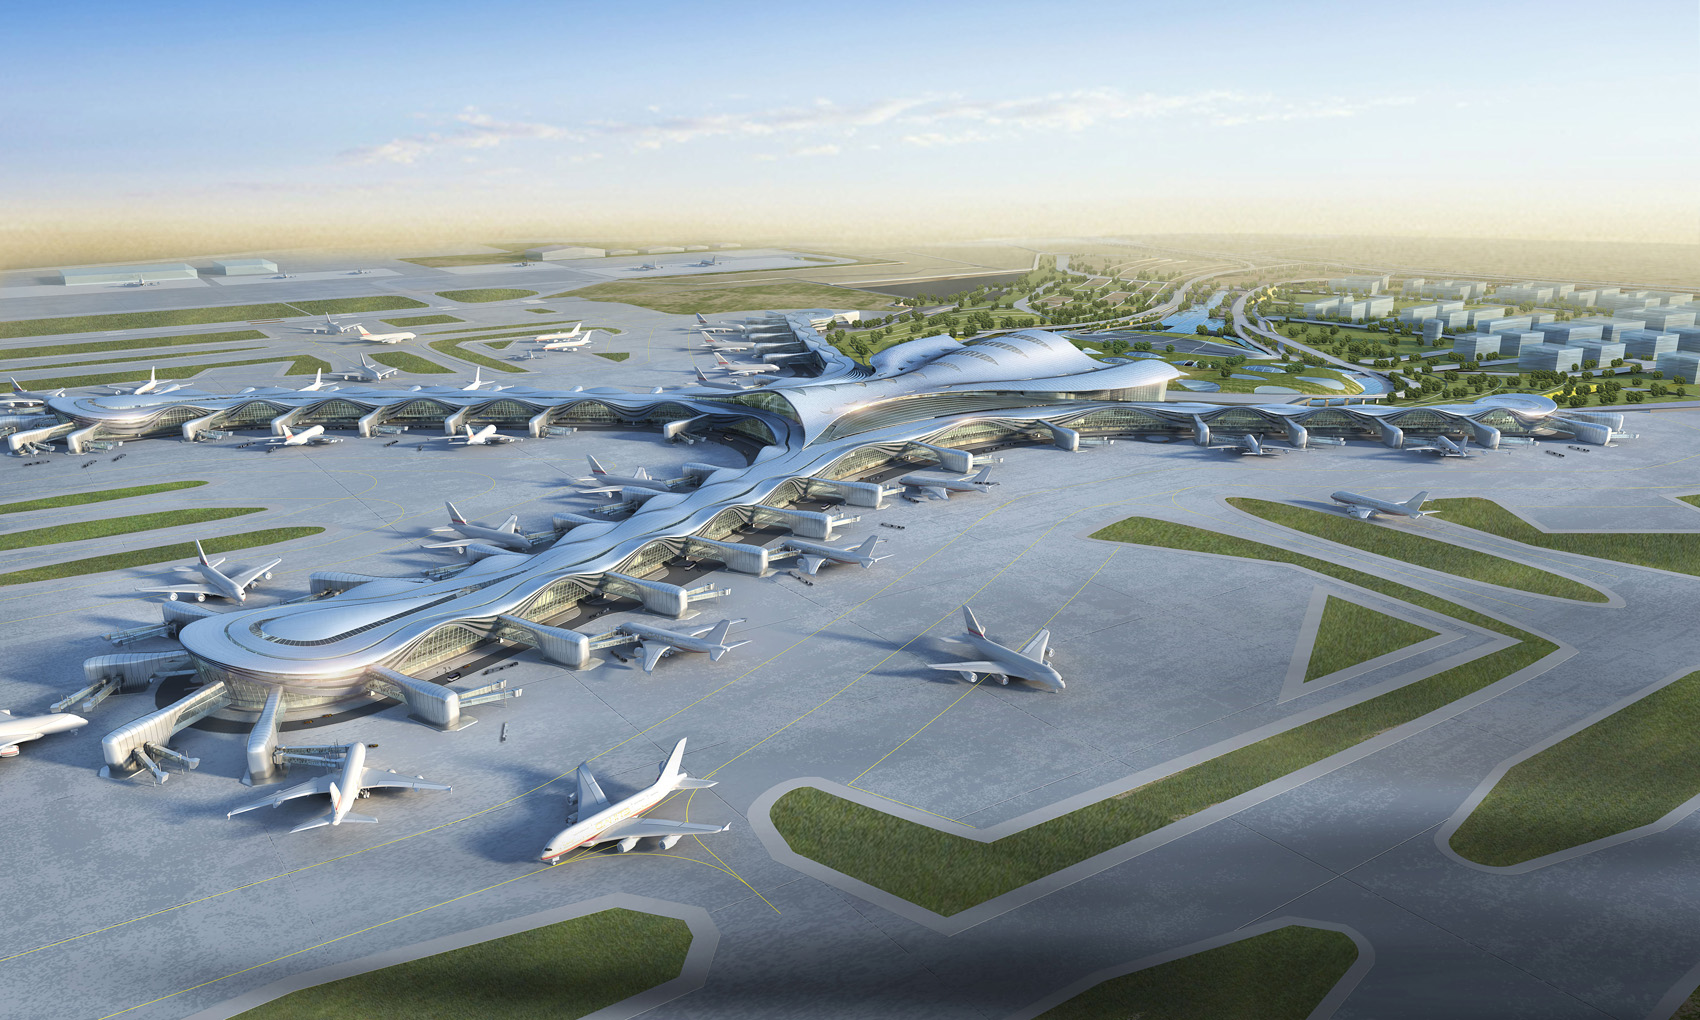 An artist's impression of the new Midfield Terminal of the Abu Dhabi International Airport that Daniel is working on